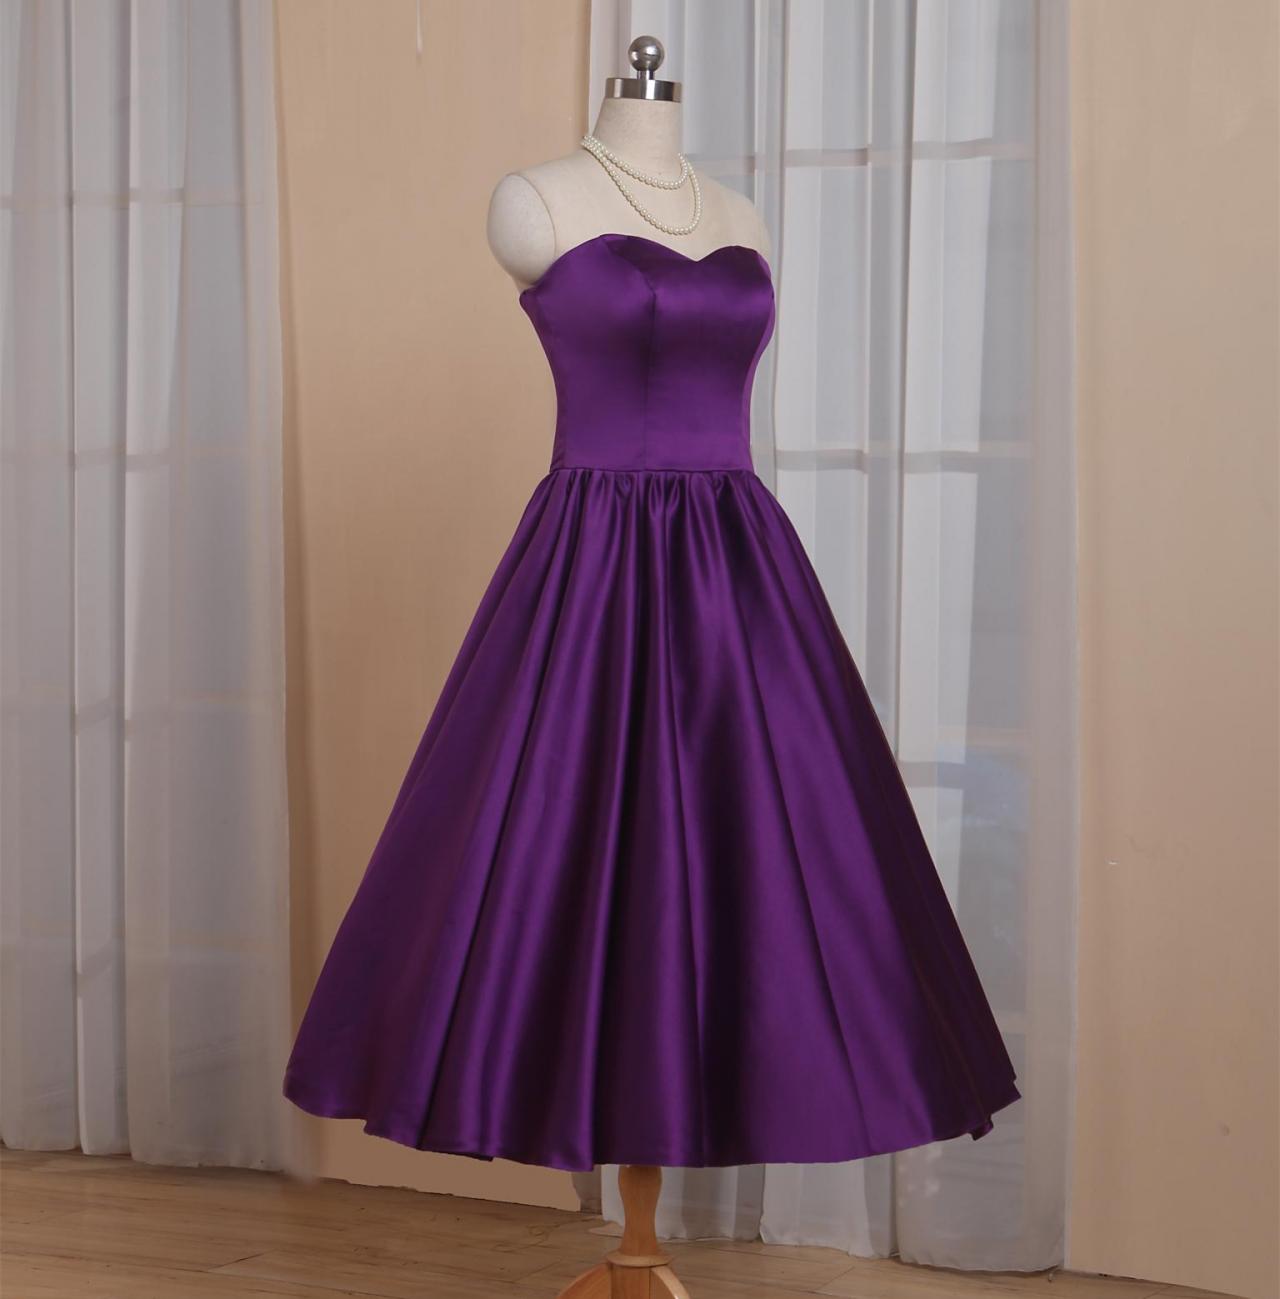 Simple Purple Satin Short Homecoming Dress, Short Prom Party Gowns , Junior Party Dress